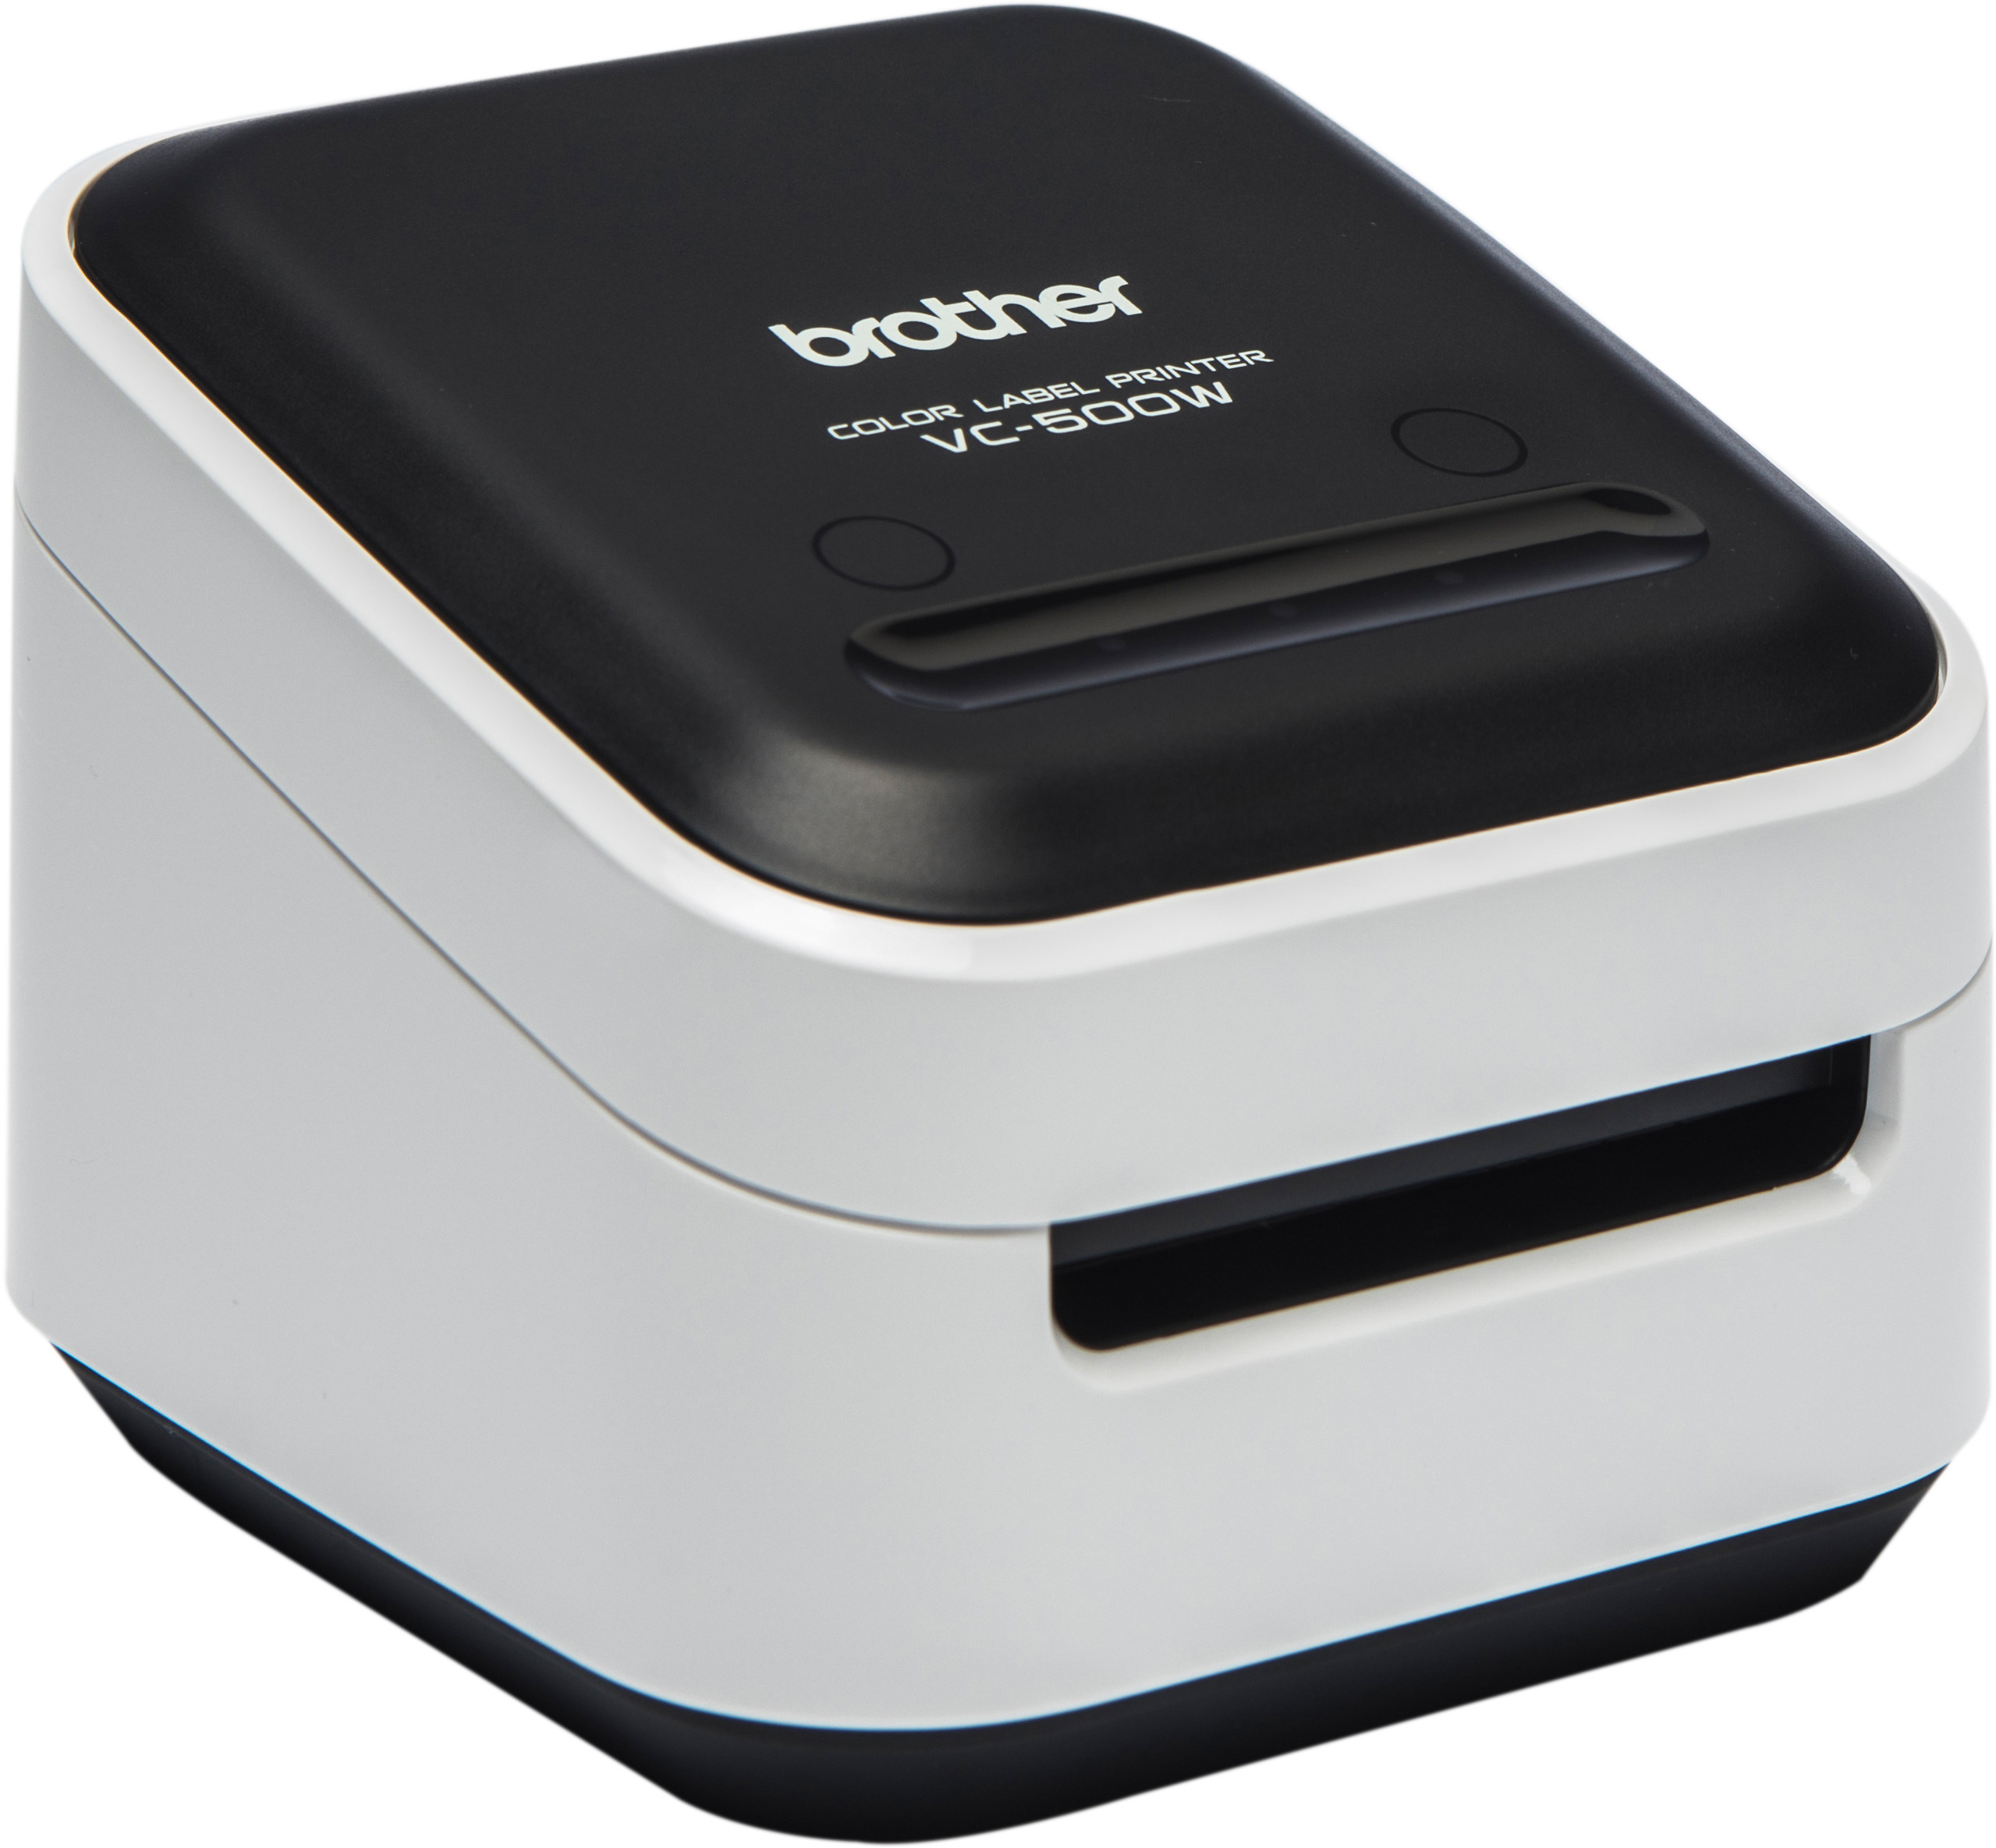 BROTHER Full Colour Label Printer VC-500W ZINK Zero Ink 50x420mm